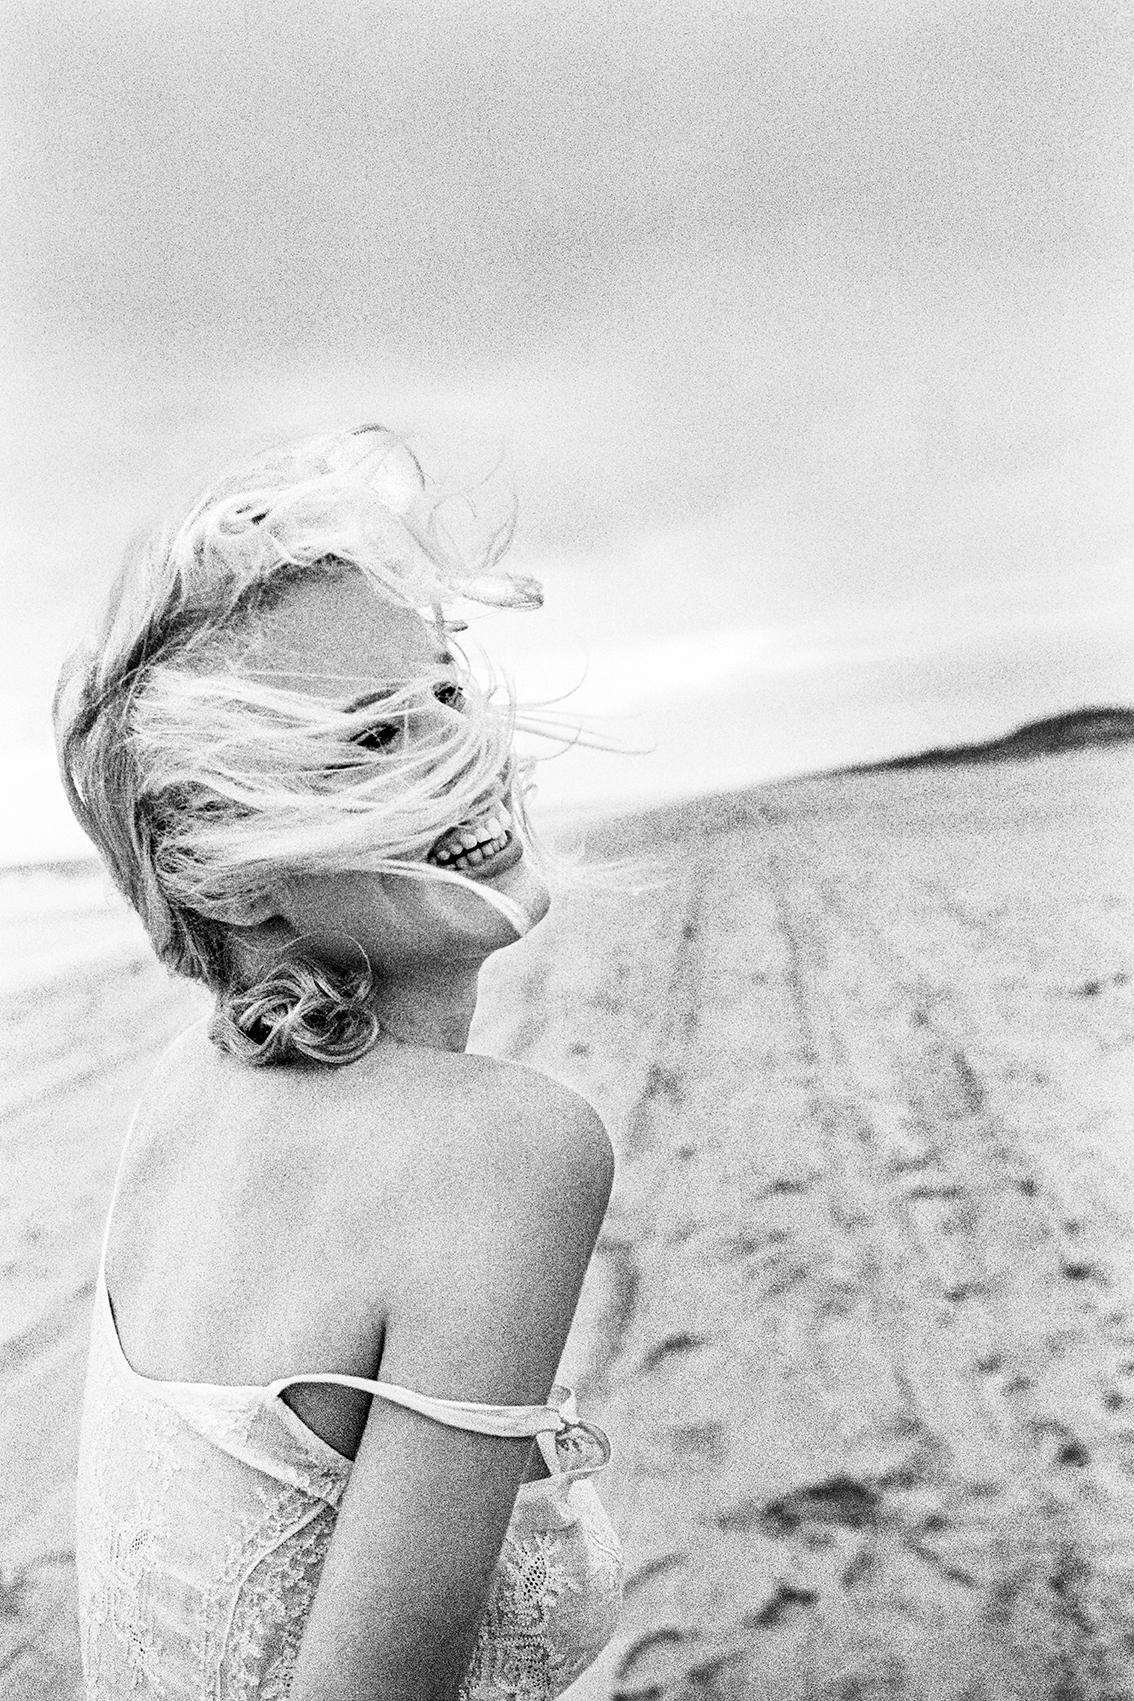 Hannes Schmid Black and White Photograph - "Always remember to smile and look up at what you got in life.", The Hamptons